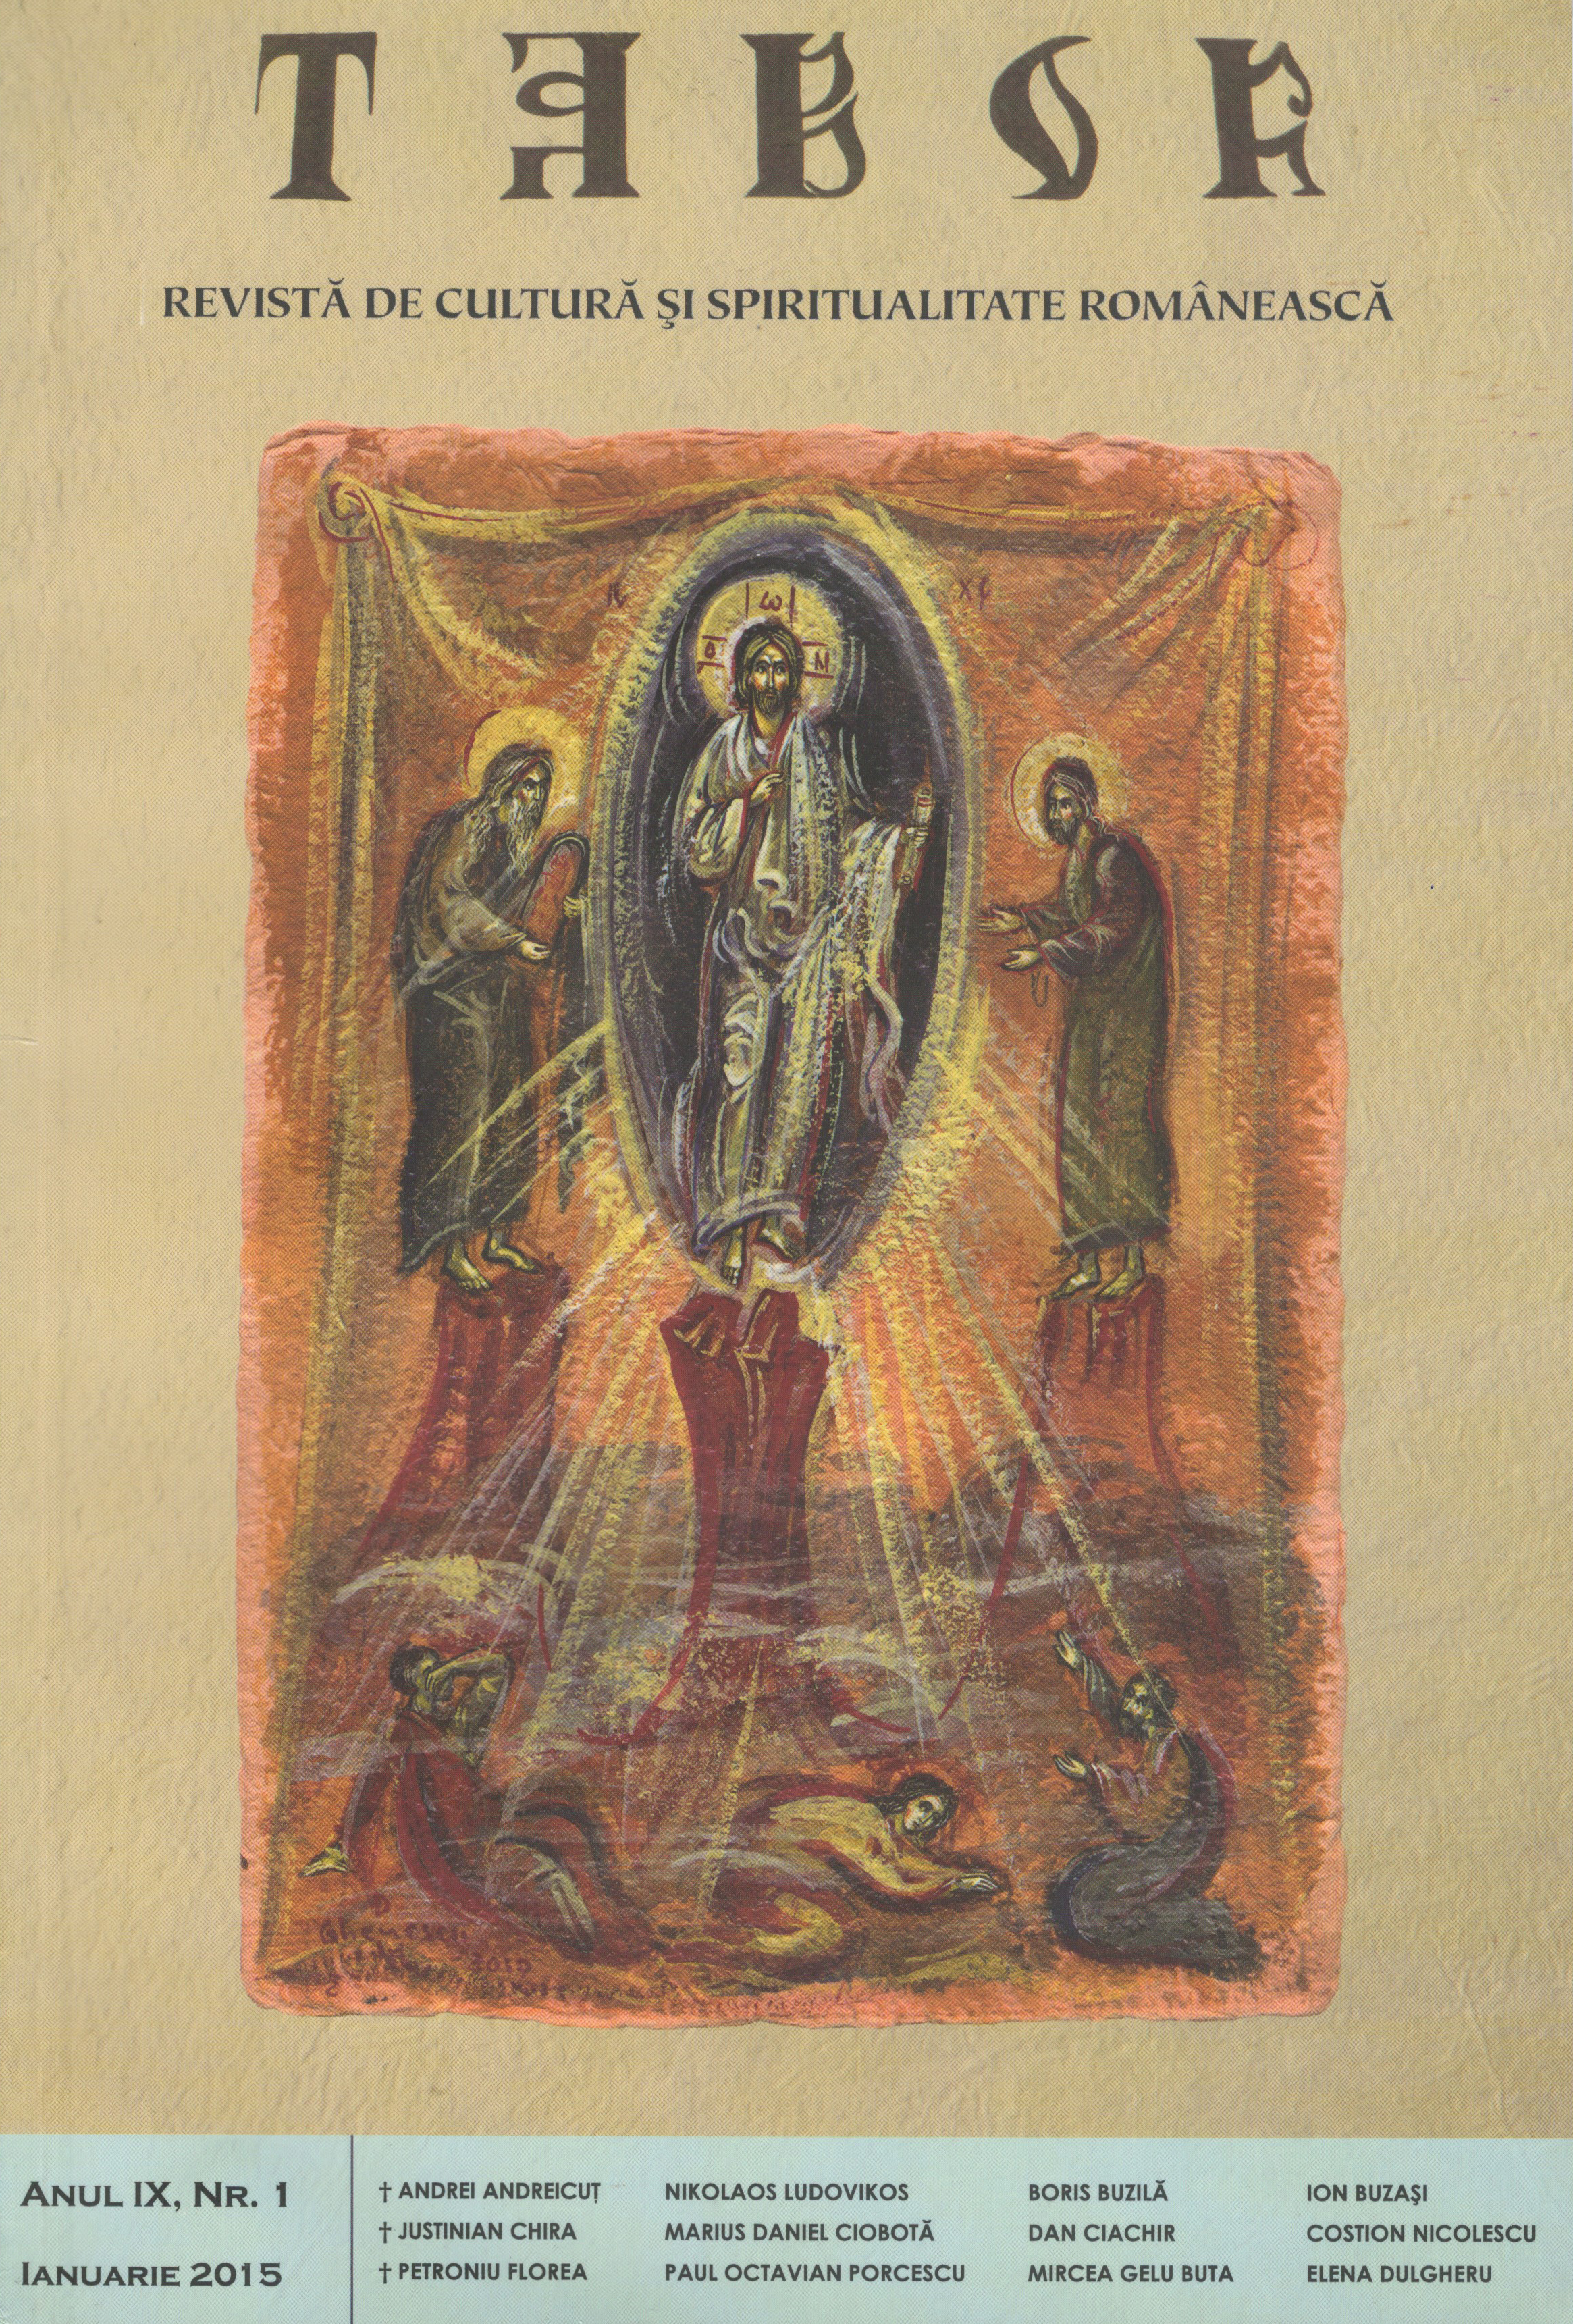 "The Nativity and the Resurrection of the Lord are the foundation of our faith" Cover Image